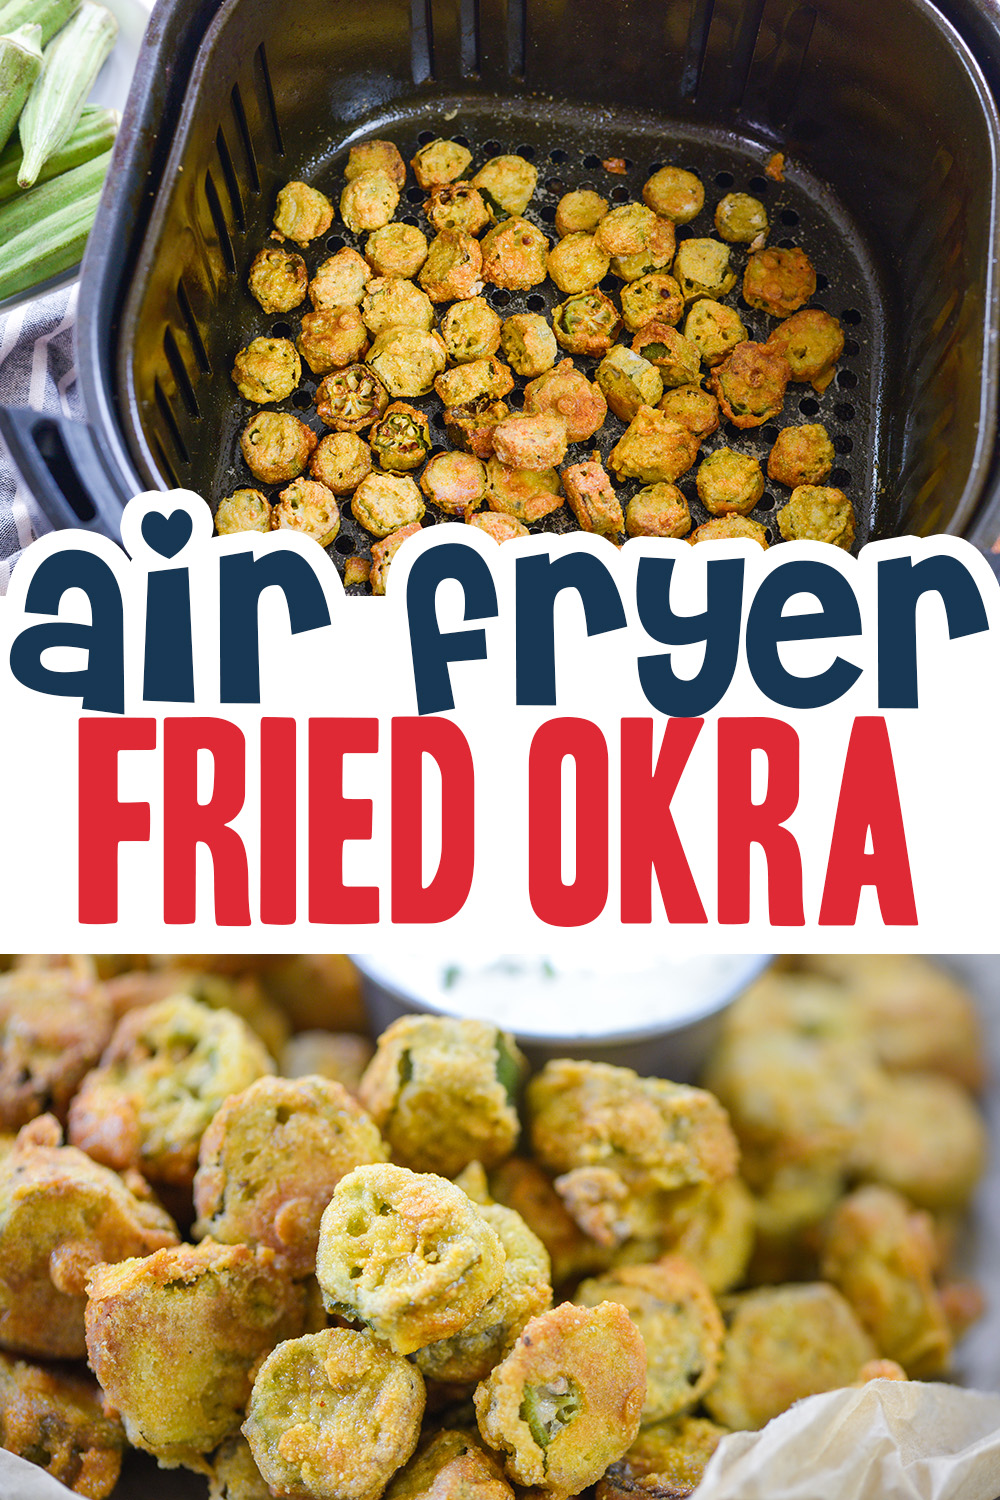 This 15 minute recipe gives you a crispy healthy snack!  Okra has many good vitamins you need to be adding to your diet!